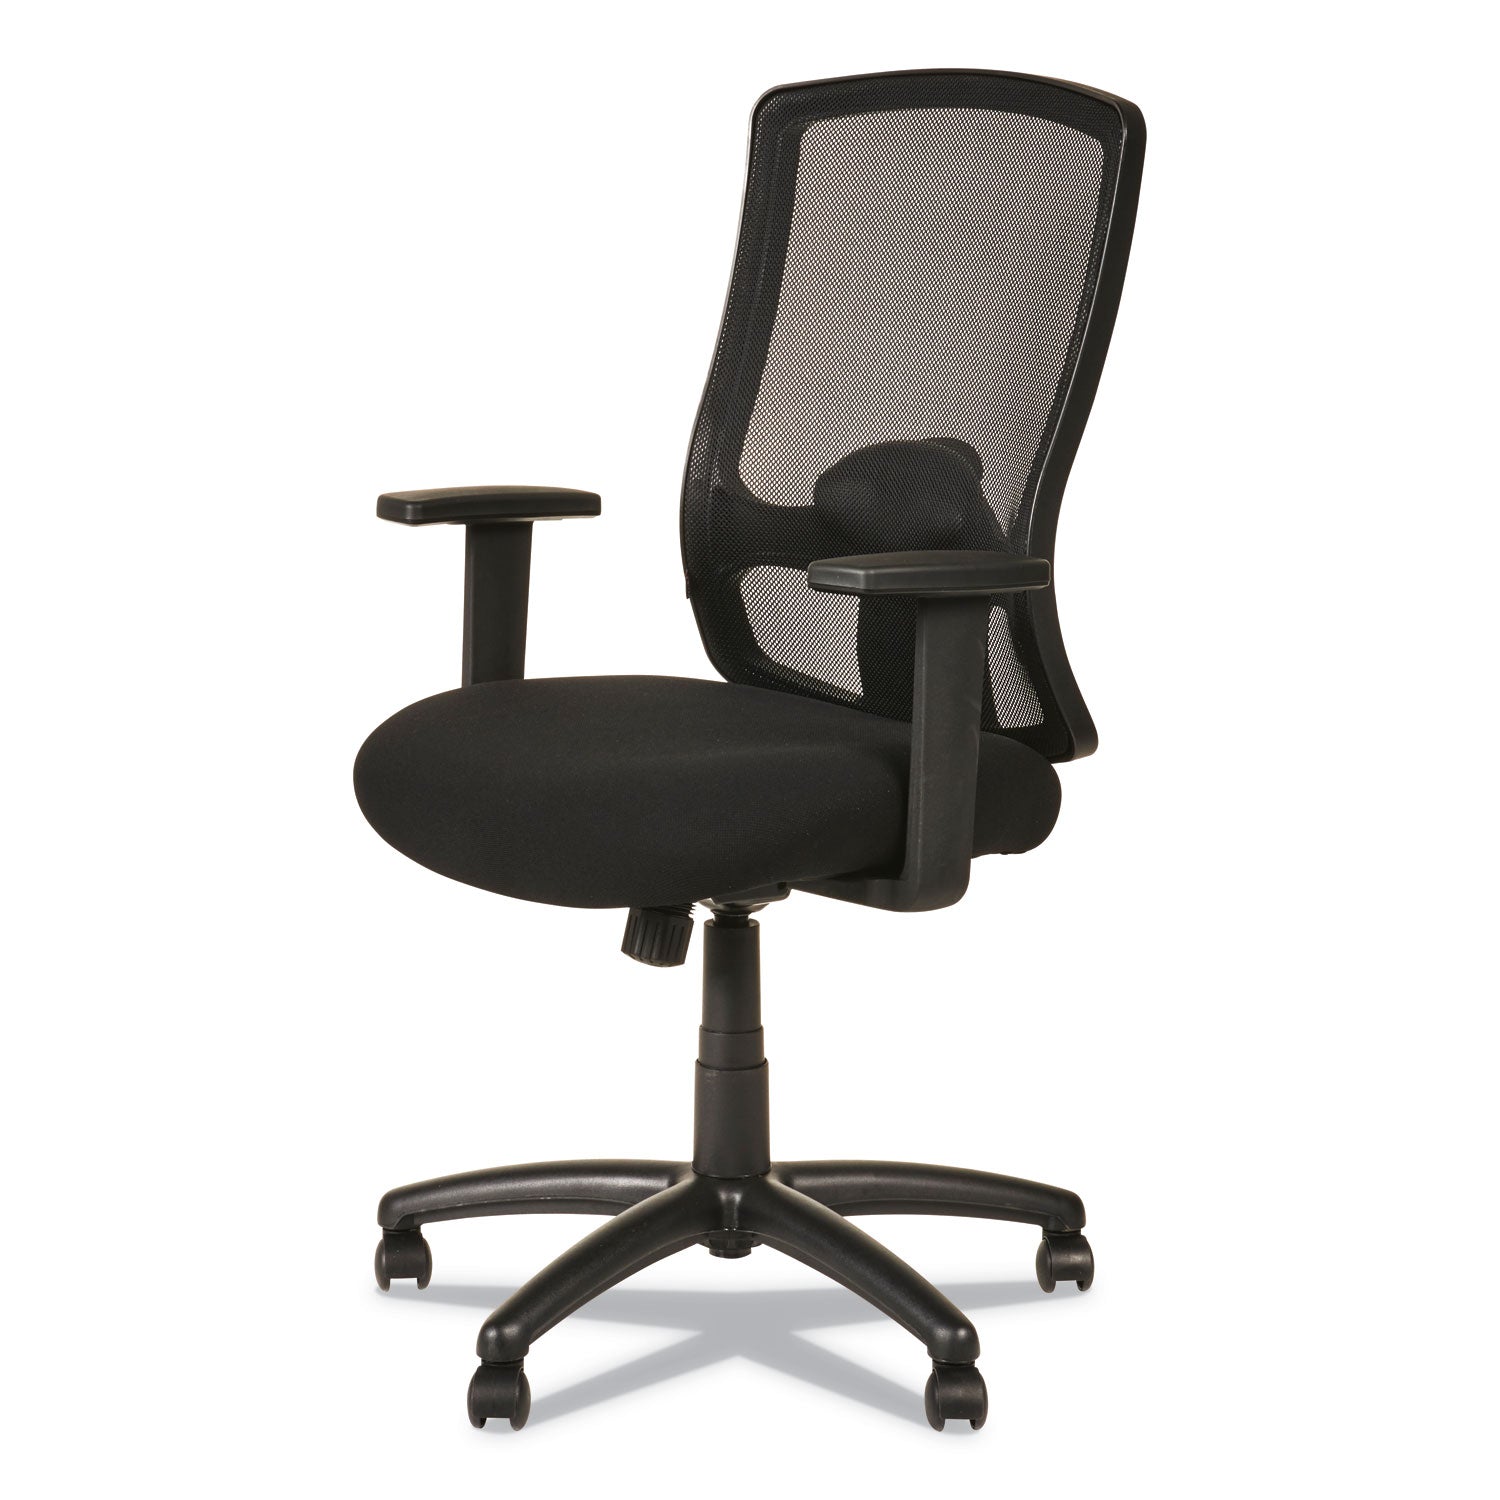 alera-etros-series-high-back-swivel-tilt-chair-supports-up-to-275-lb-1811-to-2204-seat-height-black_aleet4117b - 6